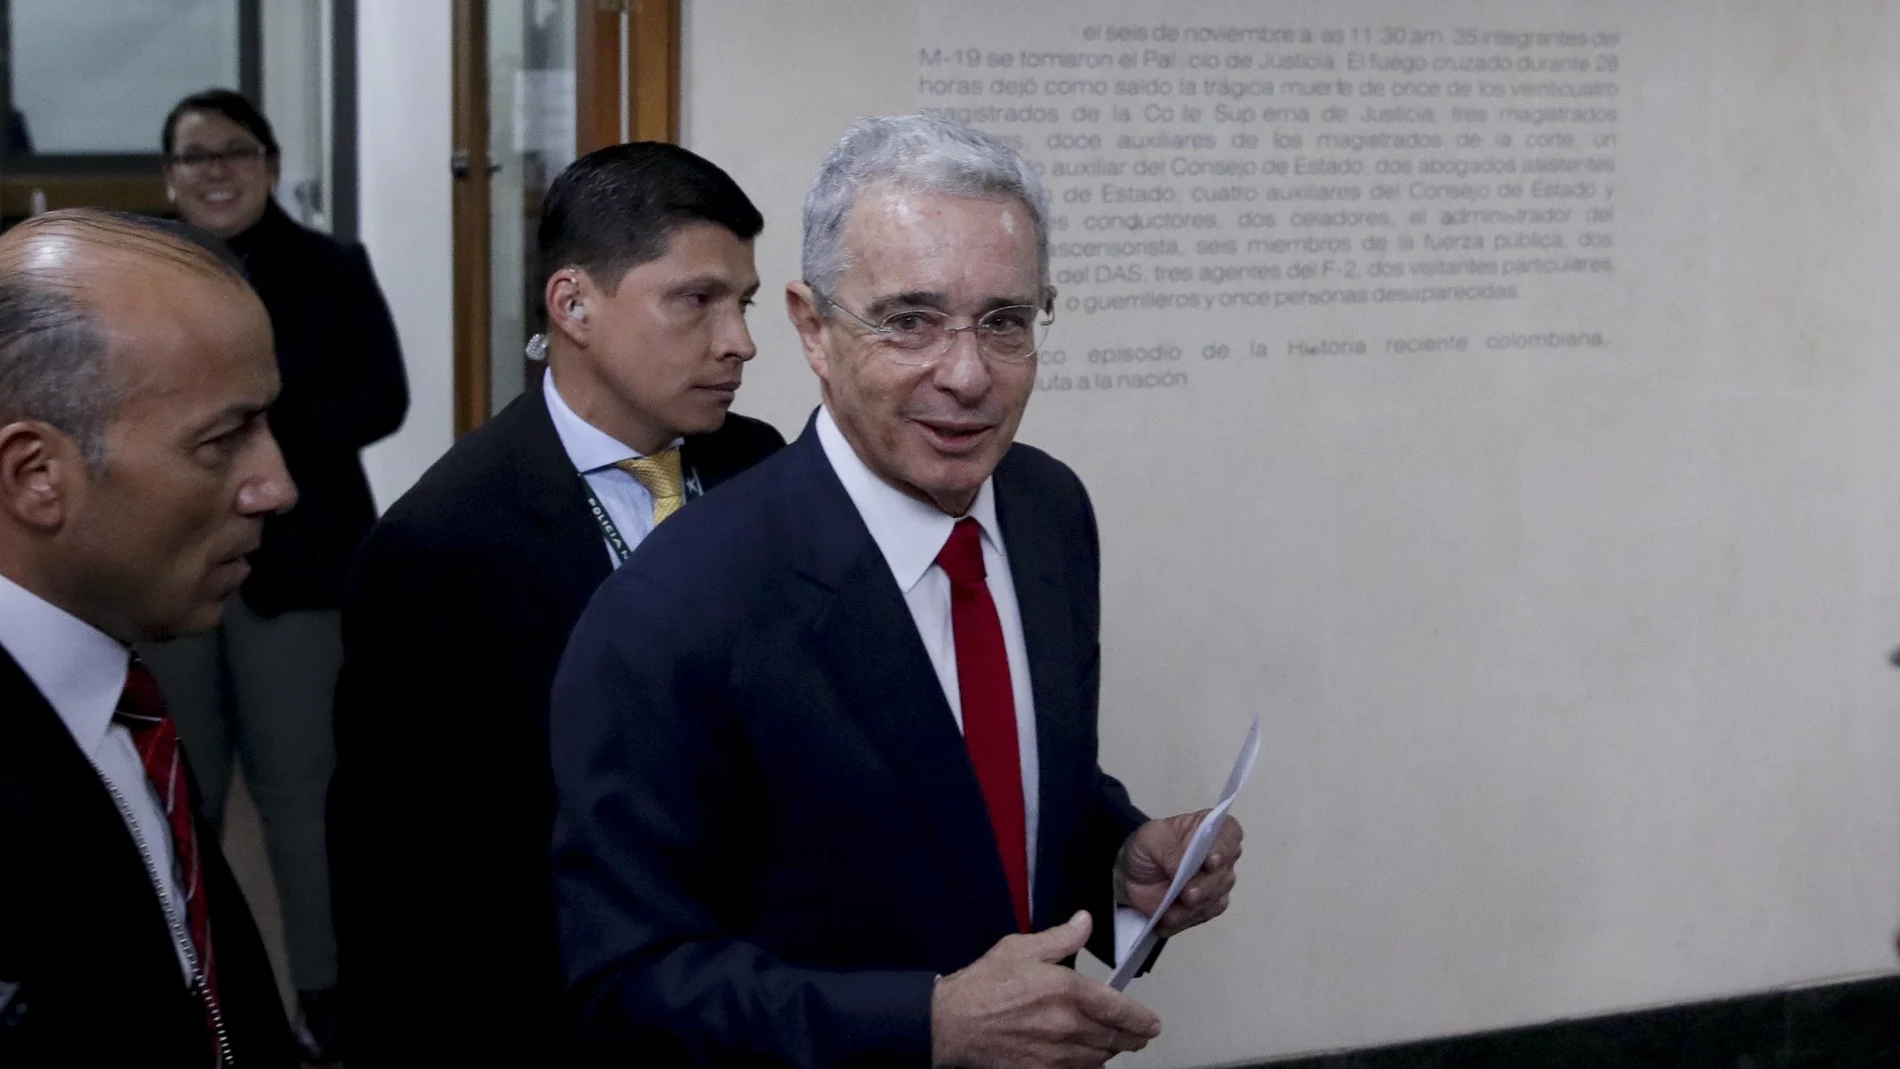 FILE - In this Oct. 8, 2019 file photo, Senator and former president Alvaro Uribe arrives to the Supreme Court for questioning in an investigation for witness tampering charges in Bogota, Colombia. Former president Uribe gave his version on Monday, Aug. 16, 2021, on his part regarding the countryÂ´s armed conflict to the Truth Commission. (AP Photo/Ivan Valencia, File)